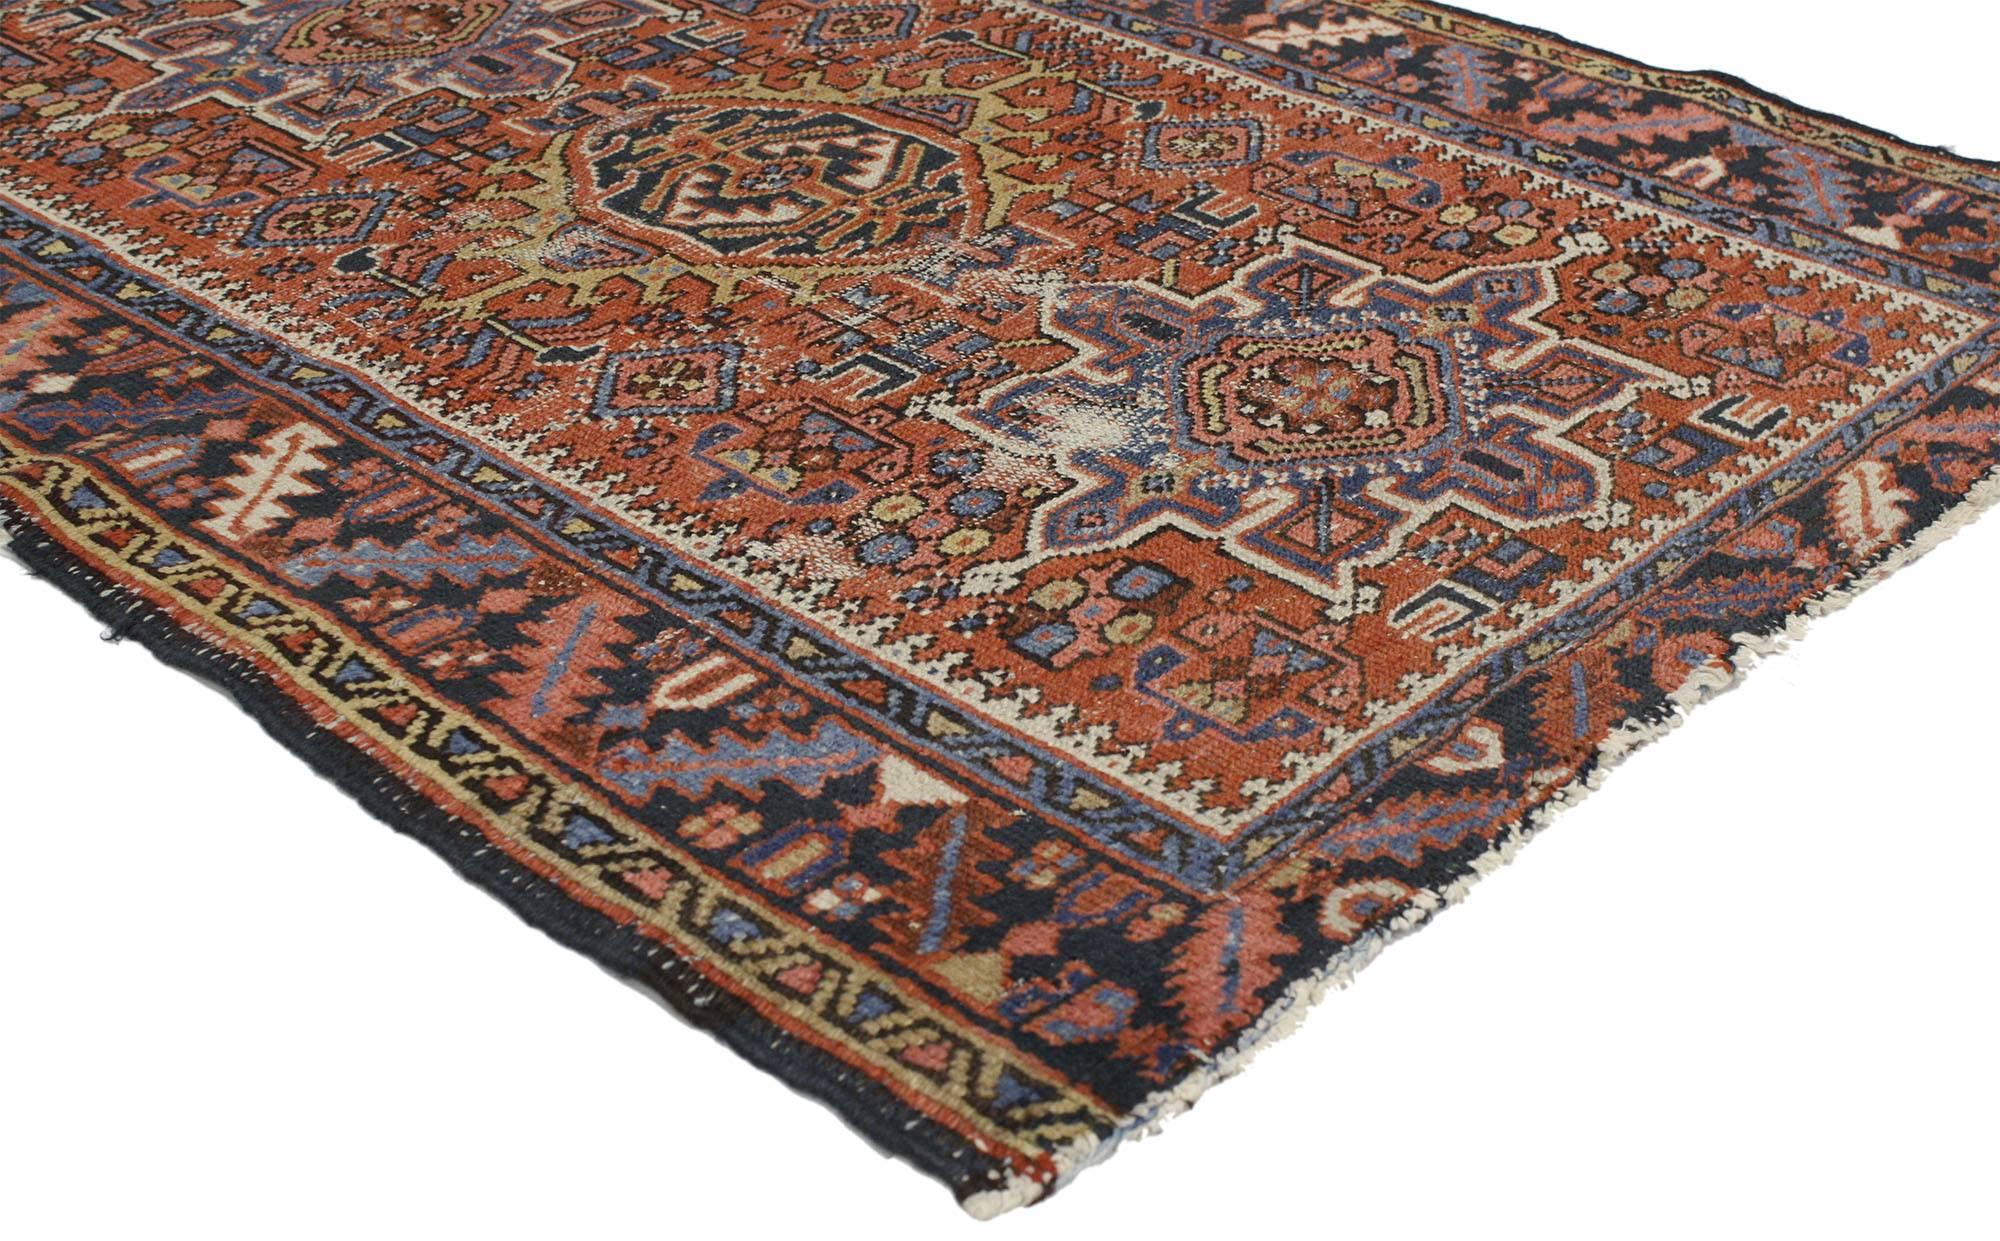 Hand-Knotted Antique Persian Heriz Rug with Tribal Style, Study or Home Office Worn Rug